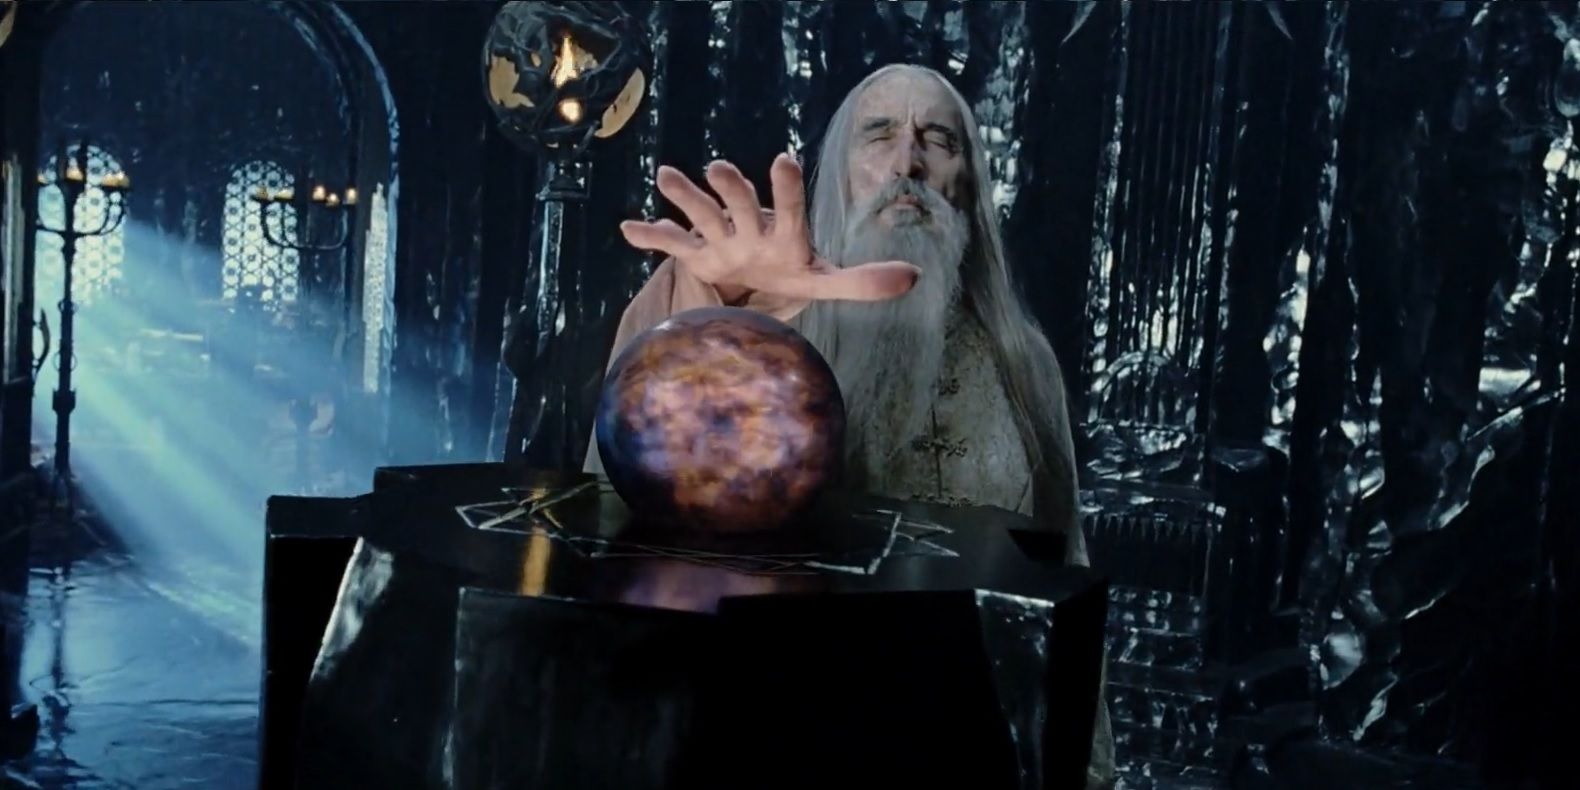 An image of the wizard Saruman using the Palantir in Lord of the Rings